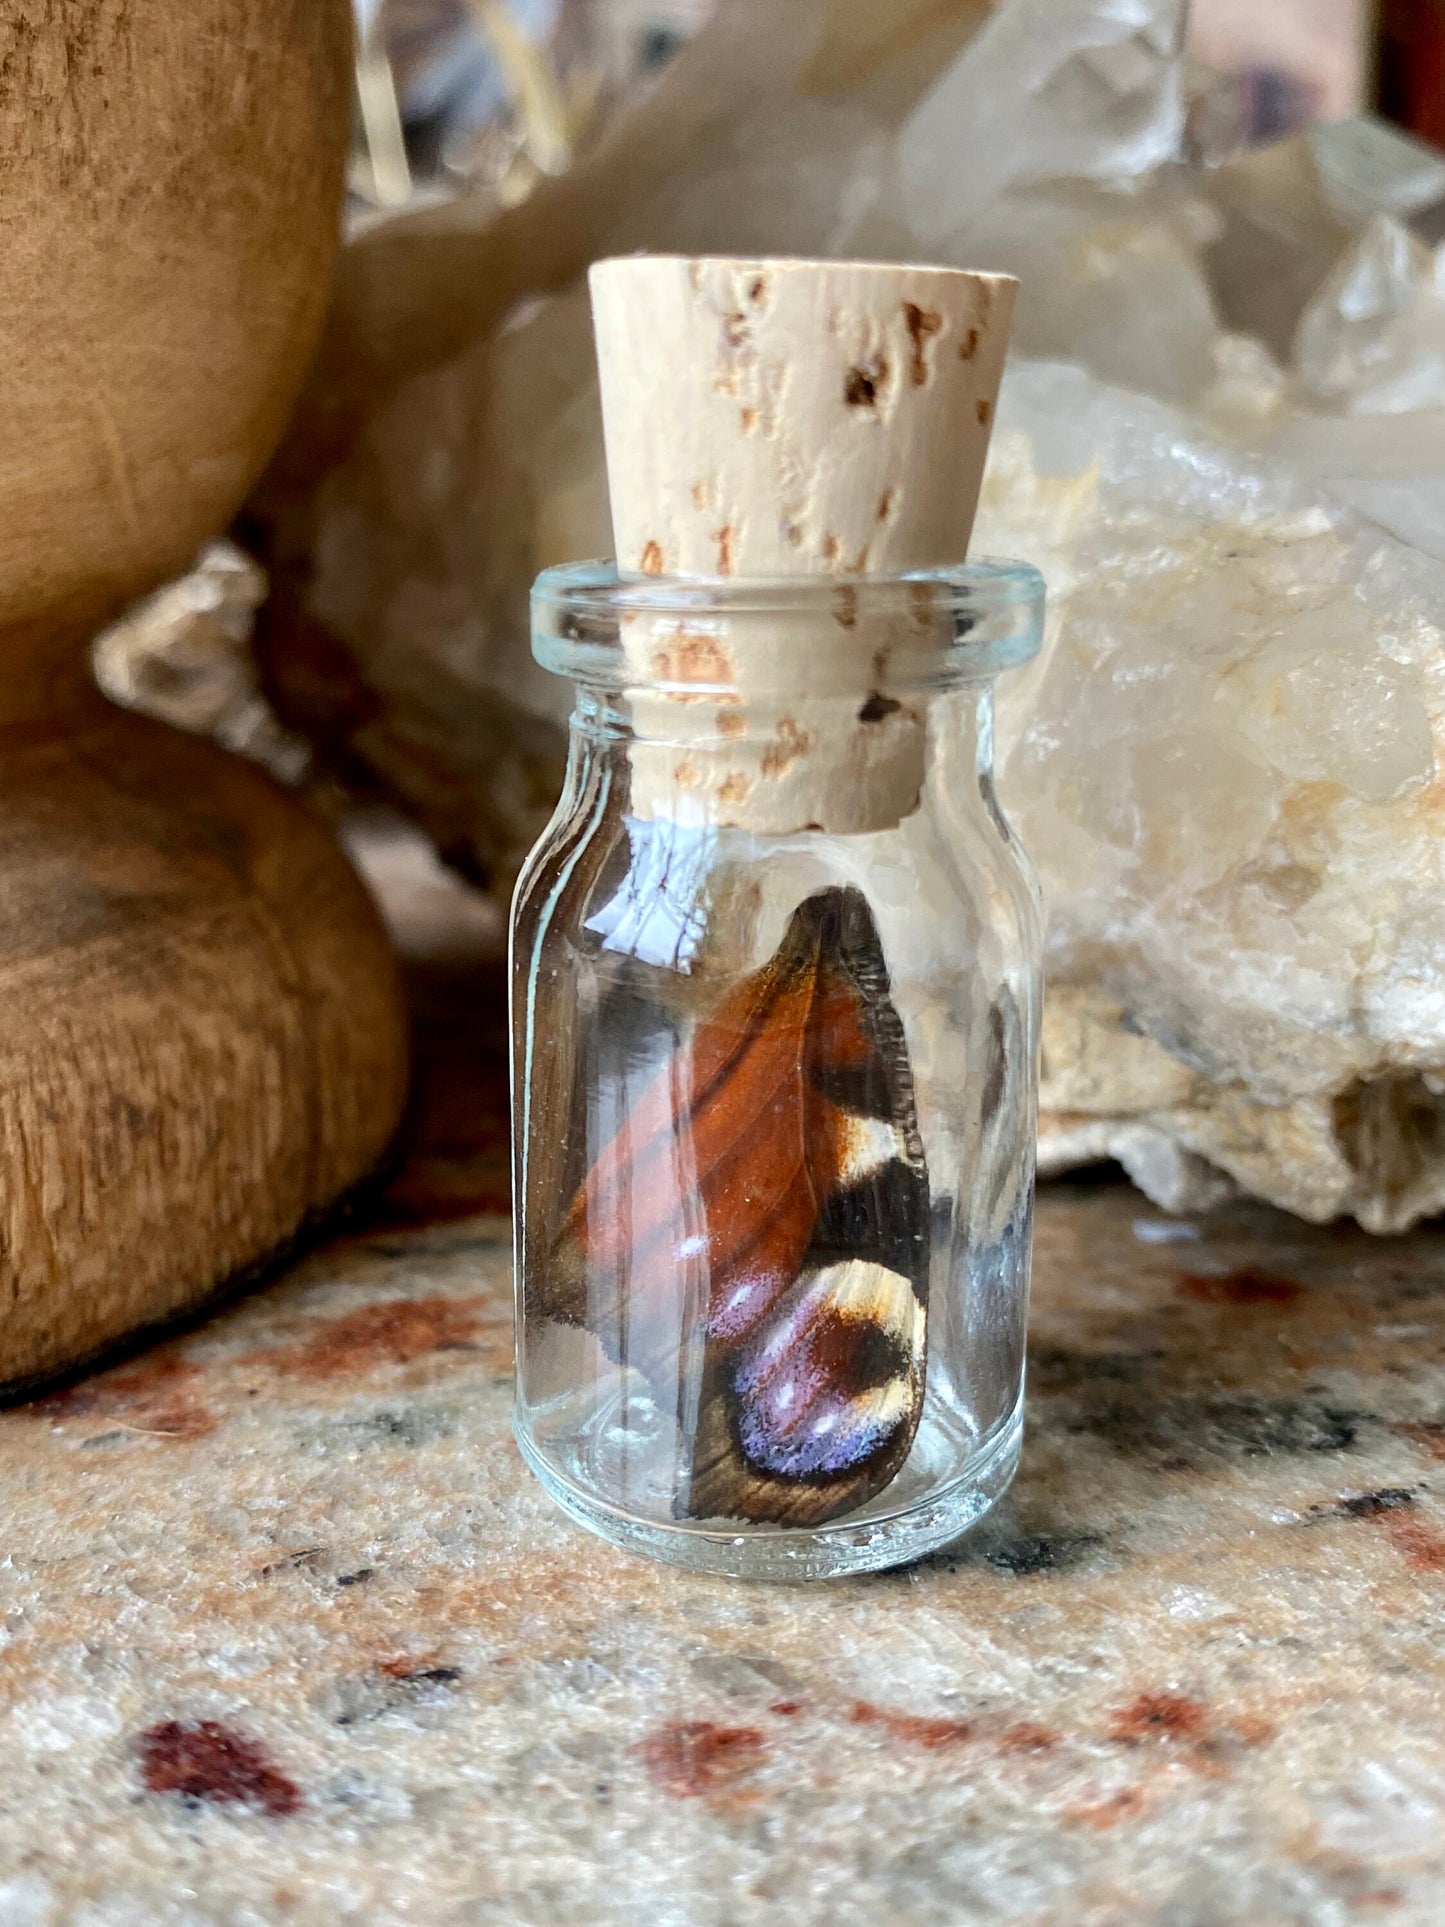 Real Butterfly Wing in Bottle XS Specimen Jar ethically sourced Funds Conservation